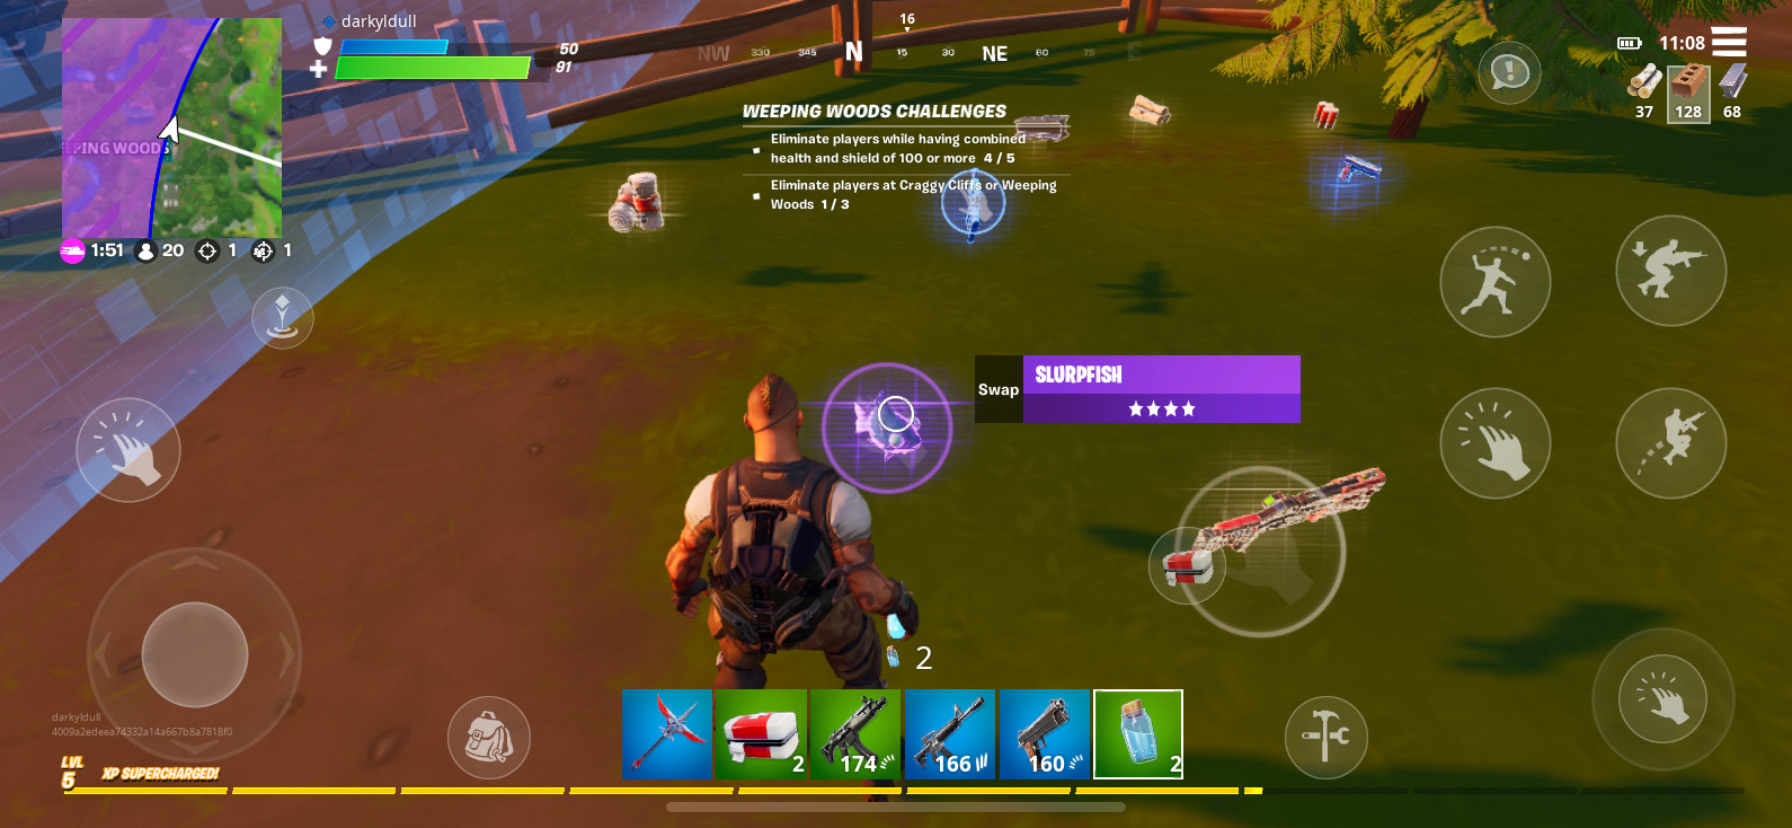 Fortnite Mobile for Android - How to Score the Best Loot and Gear Up